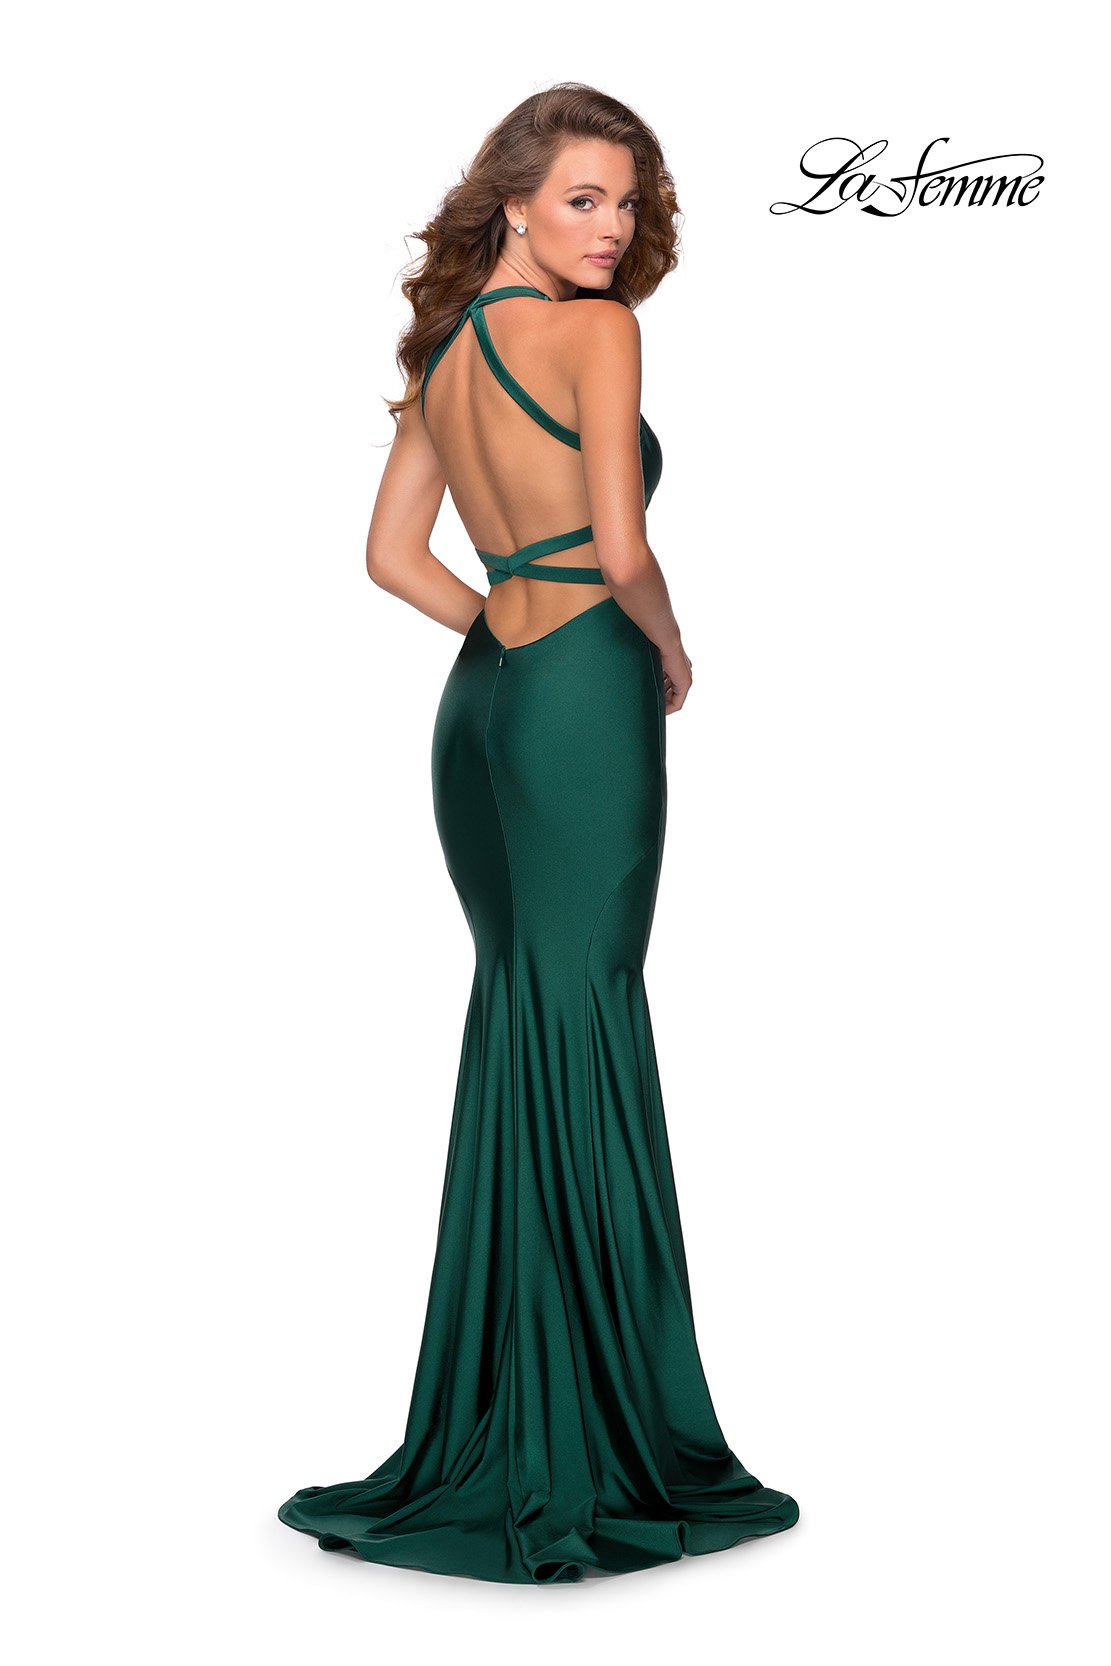 La Femme 28579 dress images in these colors: Emerald, Navy, Royal Purple.